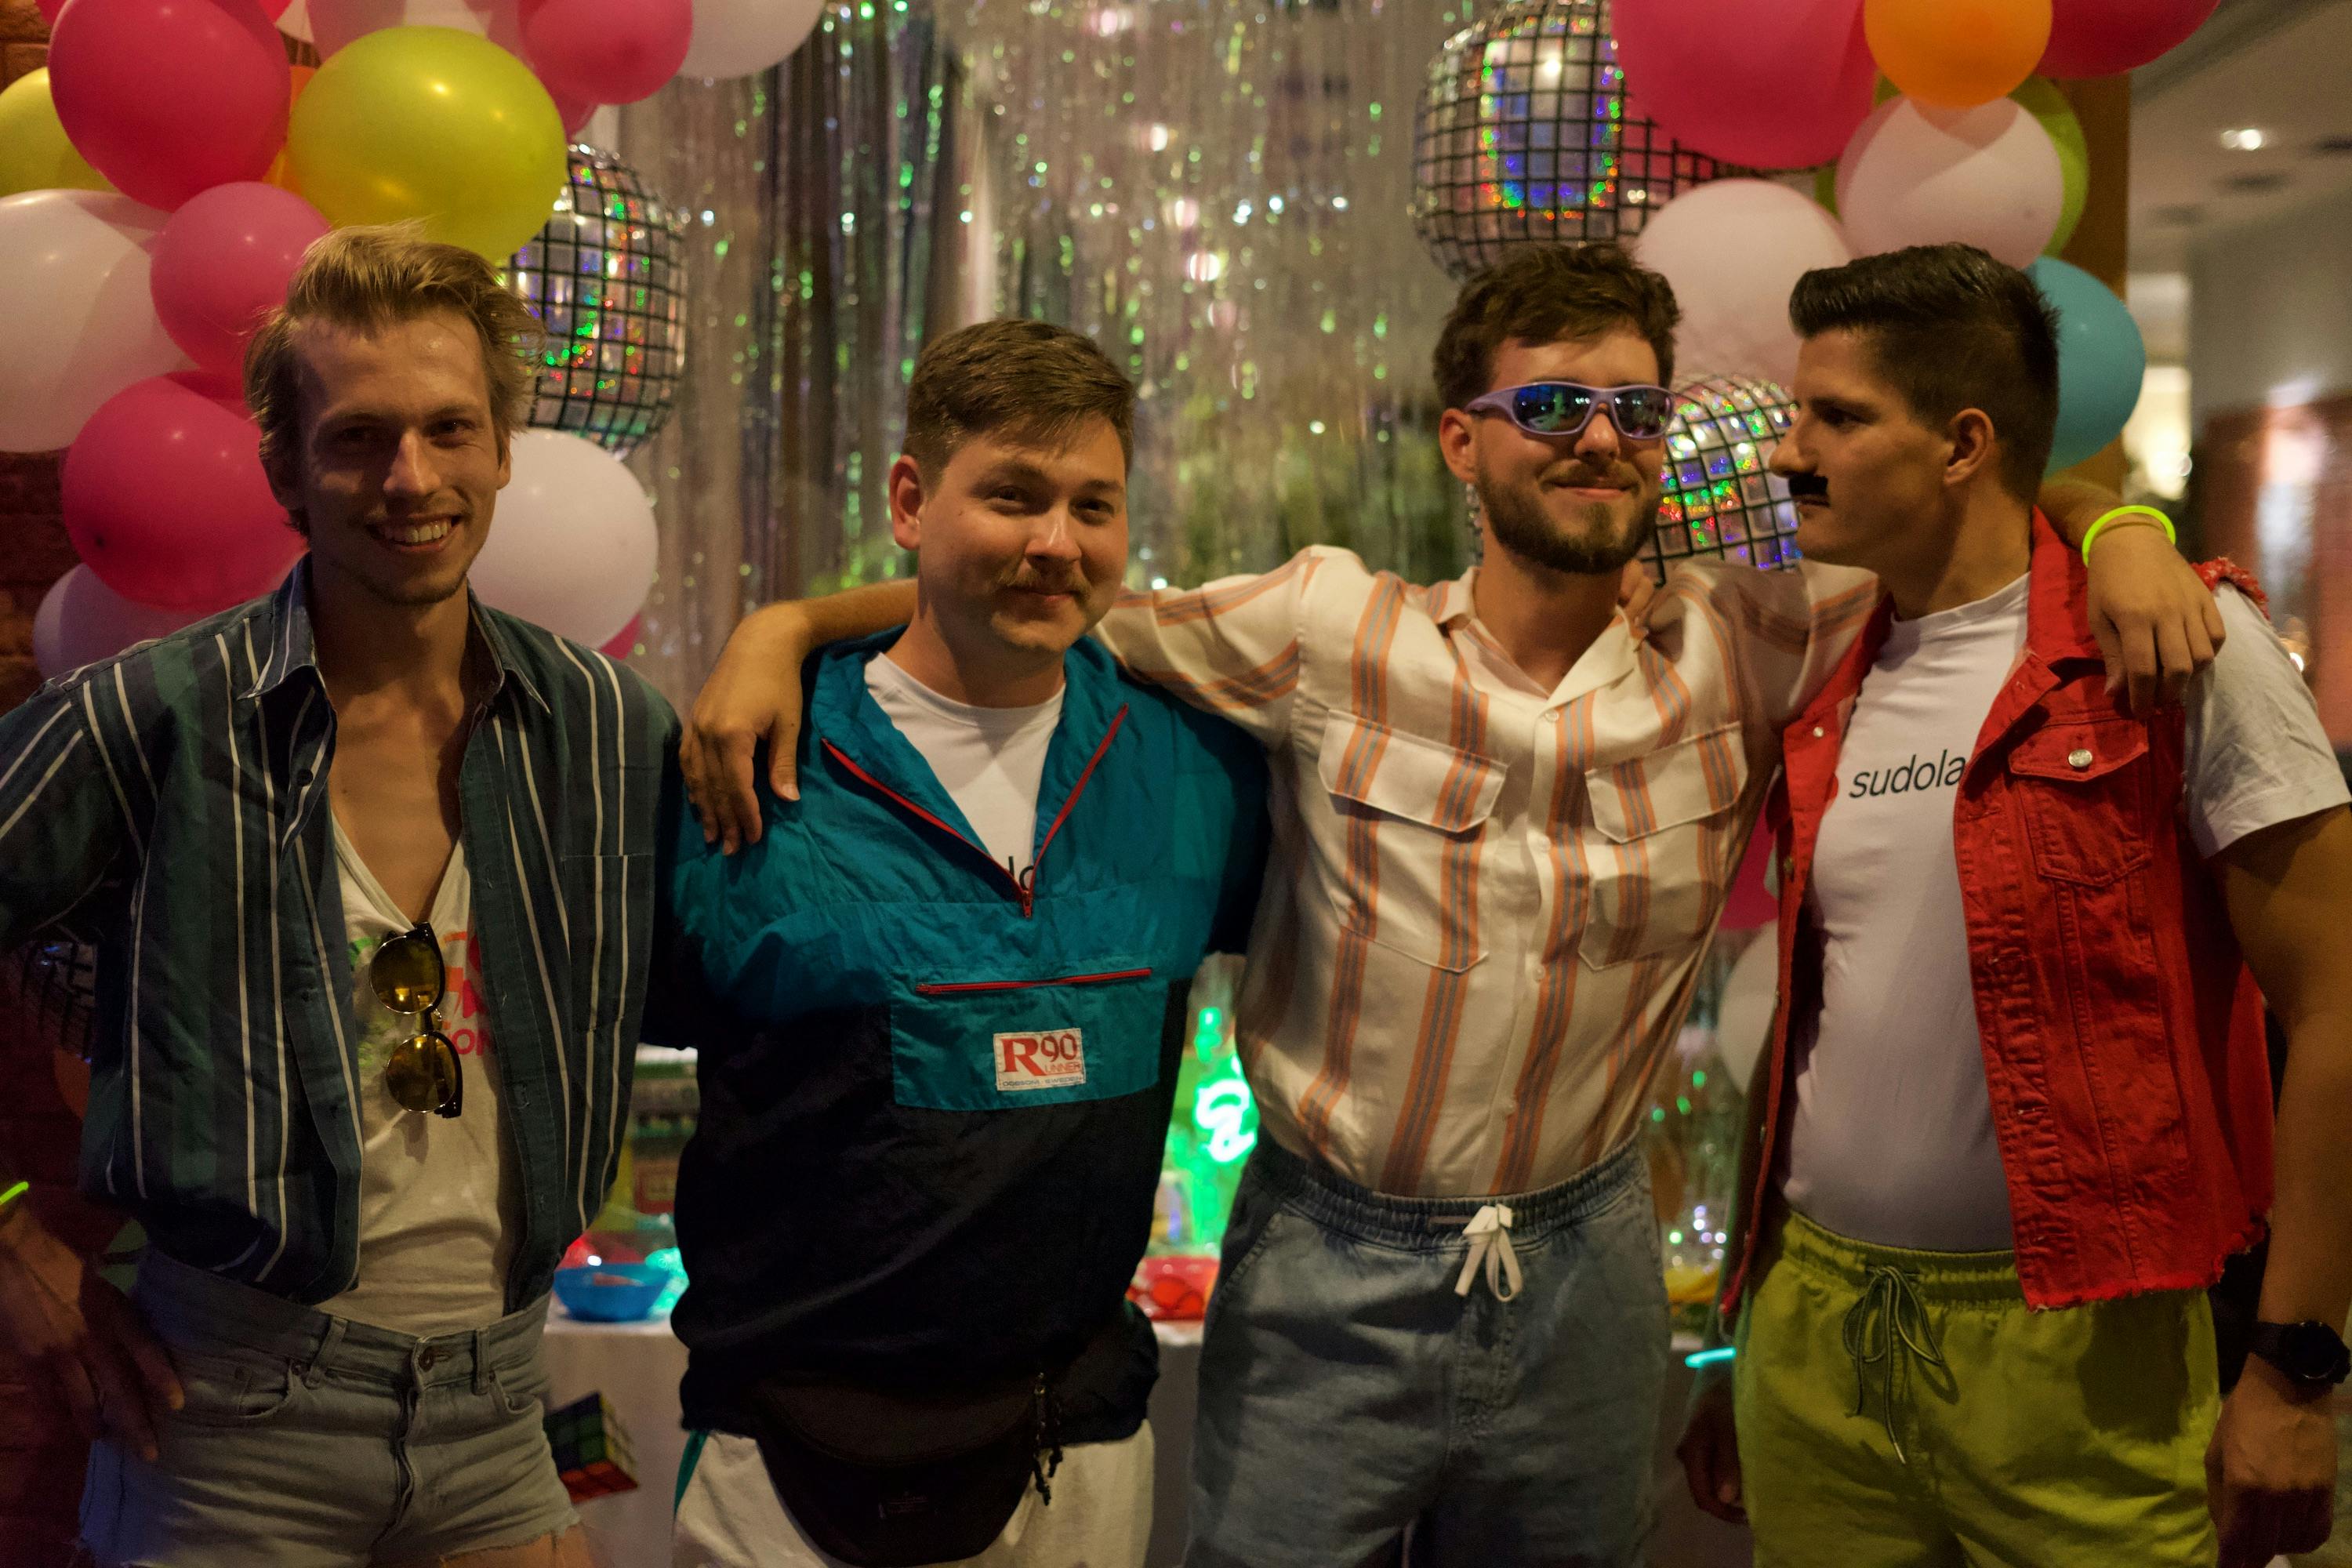 Richard, Ivan, Jozef and Jozi posing for a picture in 80s style clothes